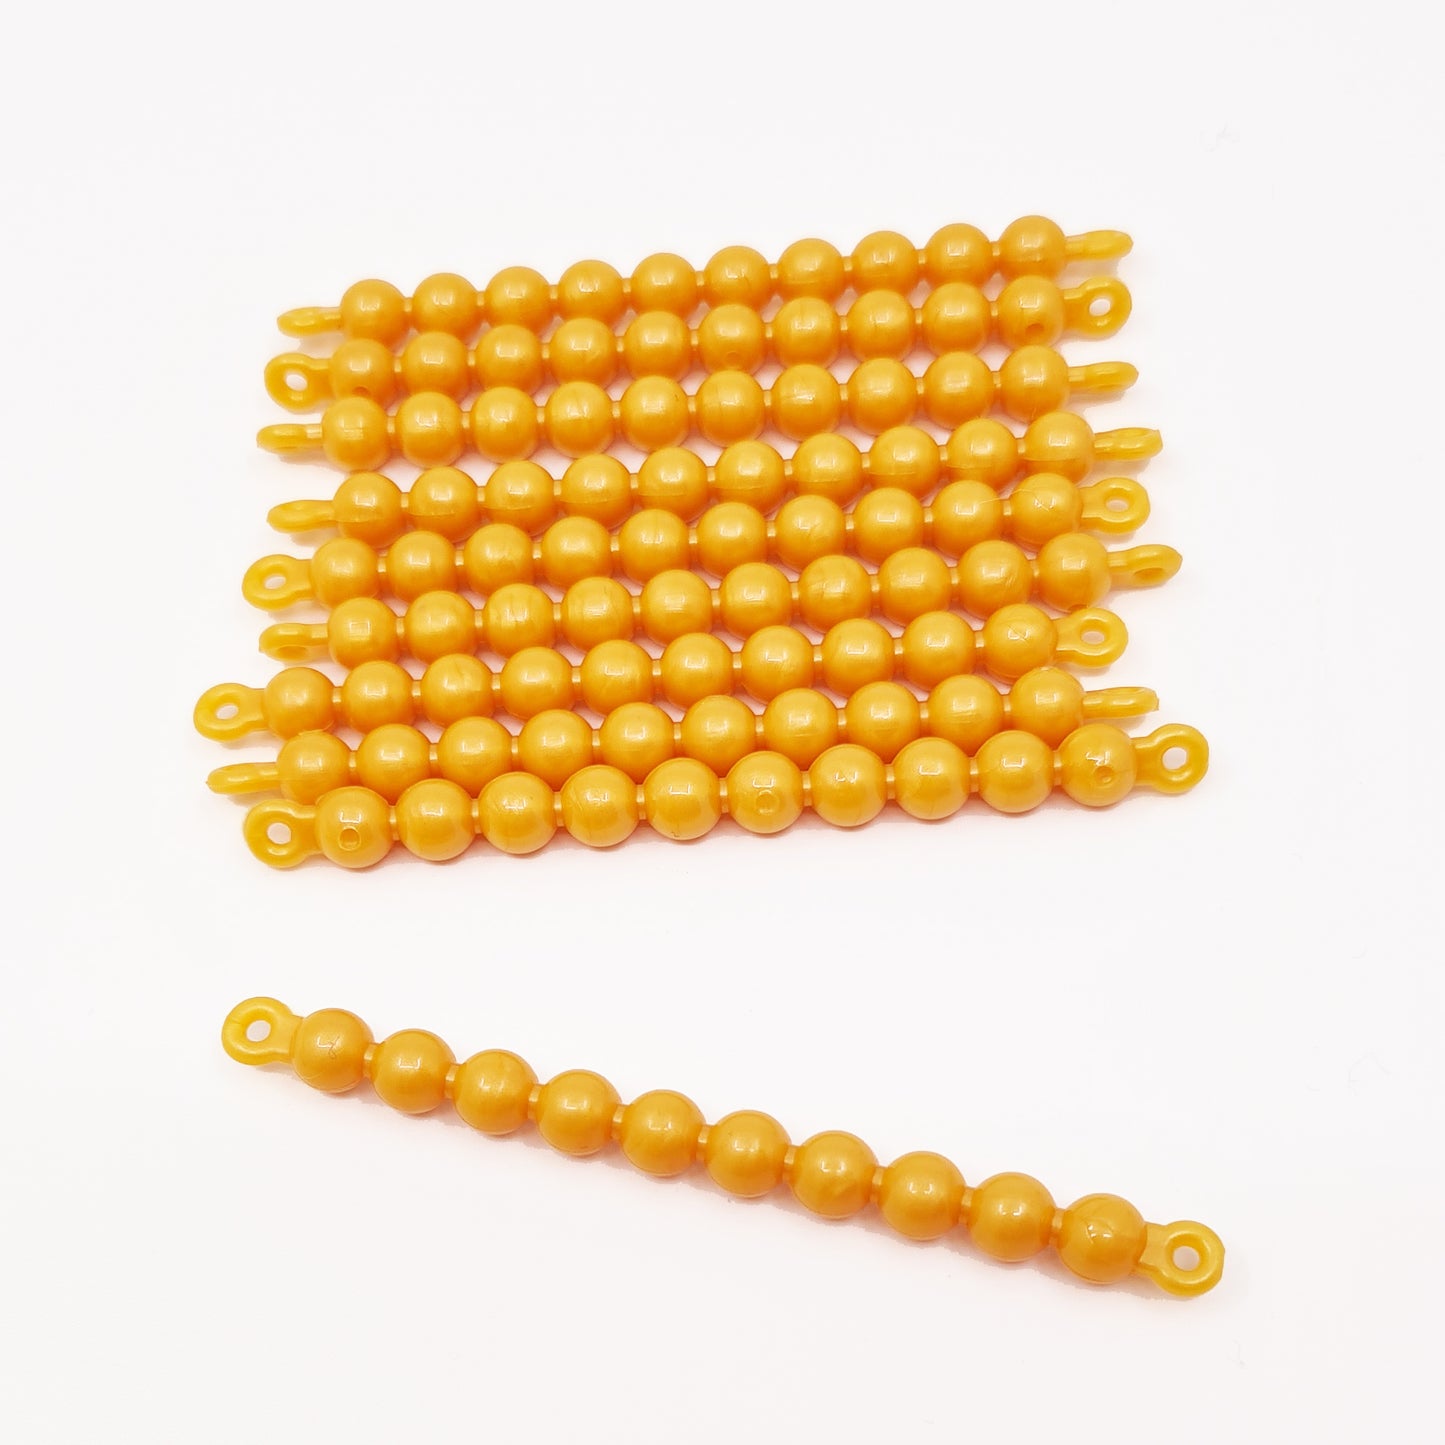 Tens Bead Bars (10) - Connected beads